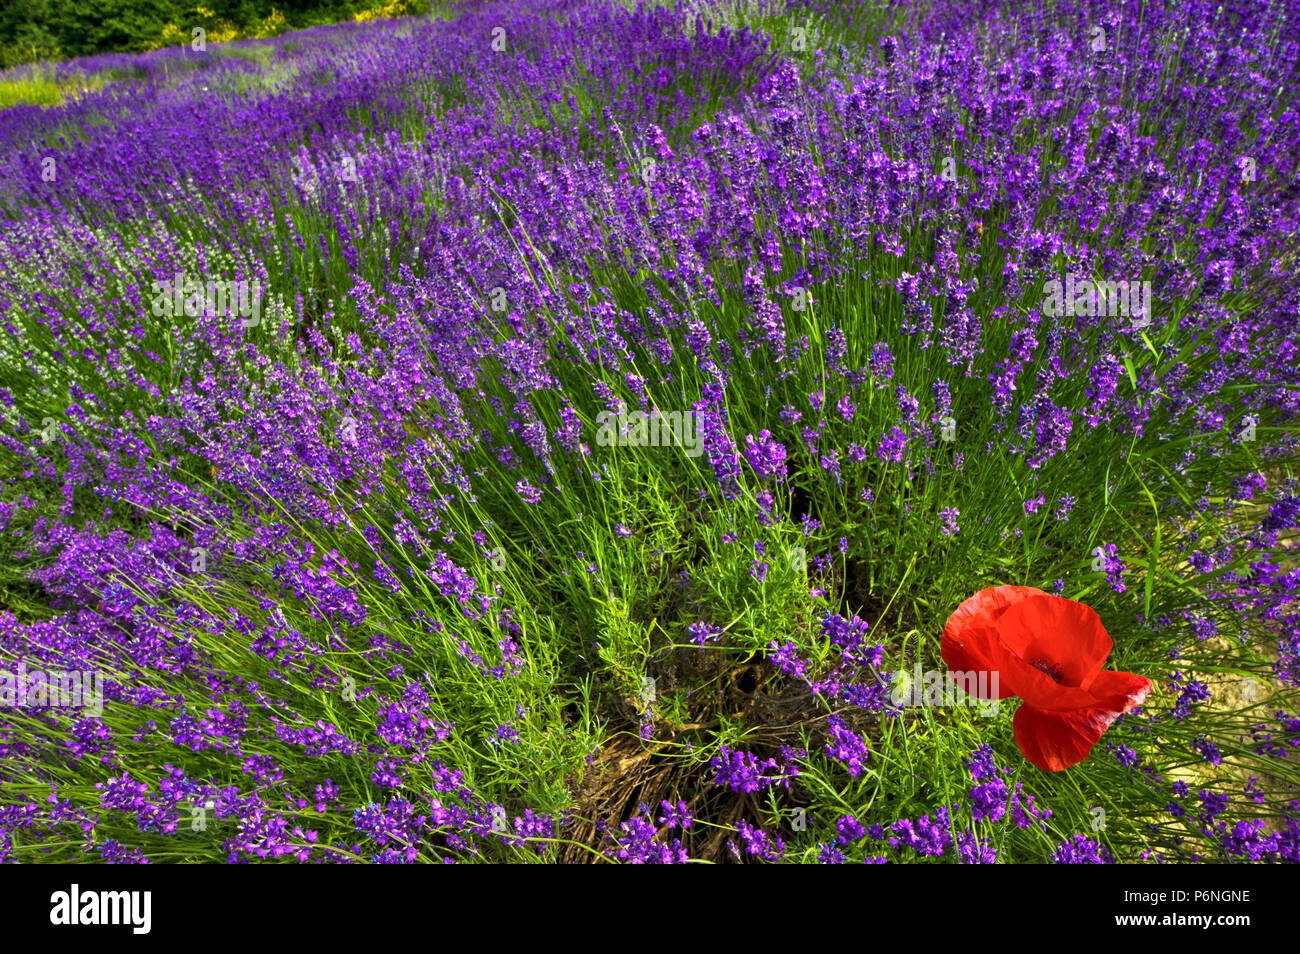 Red poppy in a lavender field in bloom, near the village of Sale San Giovanni, in the Langhe, Cuneo province, Piedmont, North Italy, Europe. Stock Photo